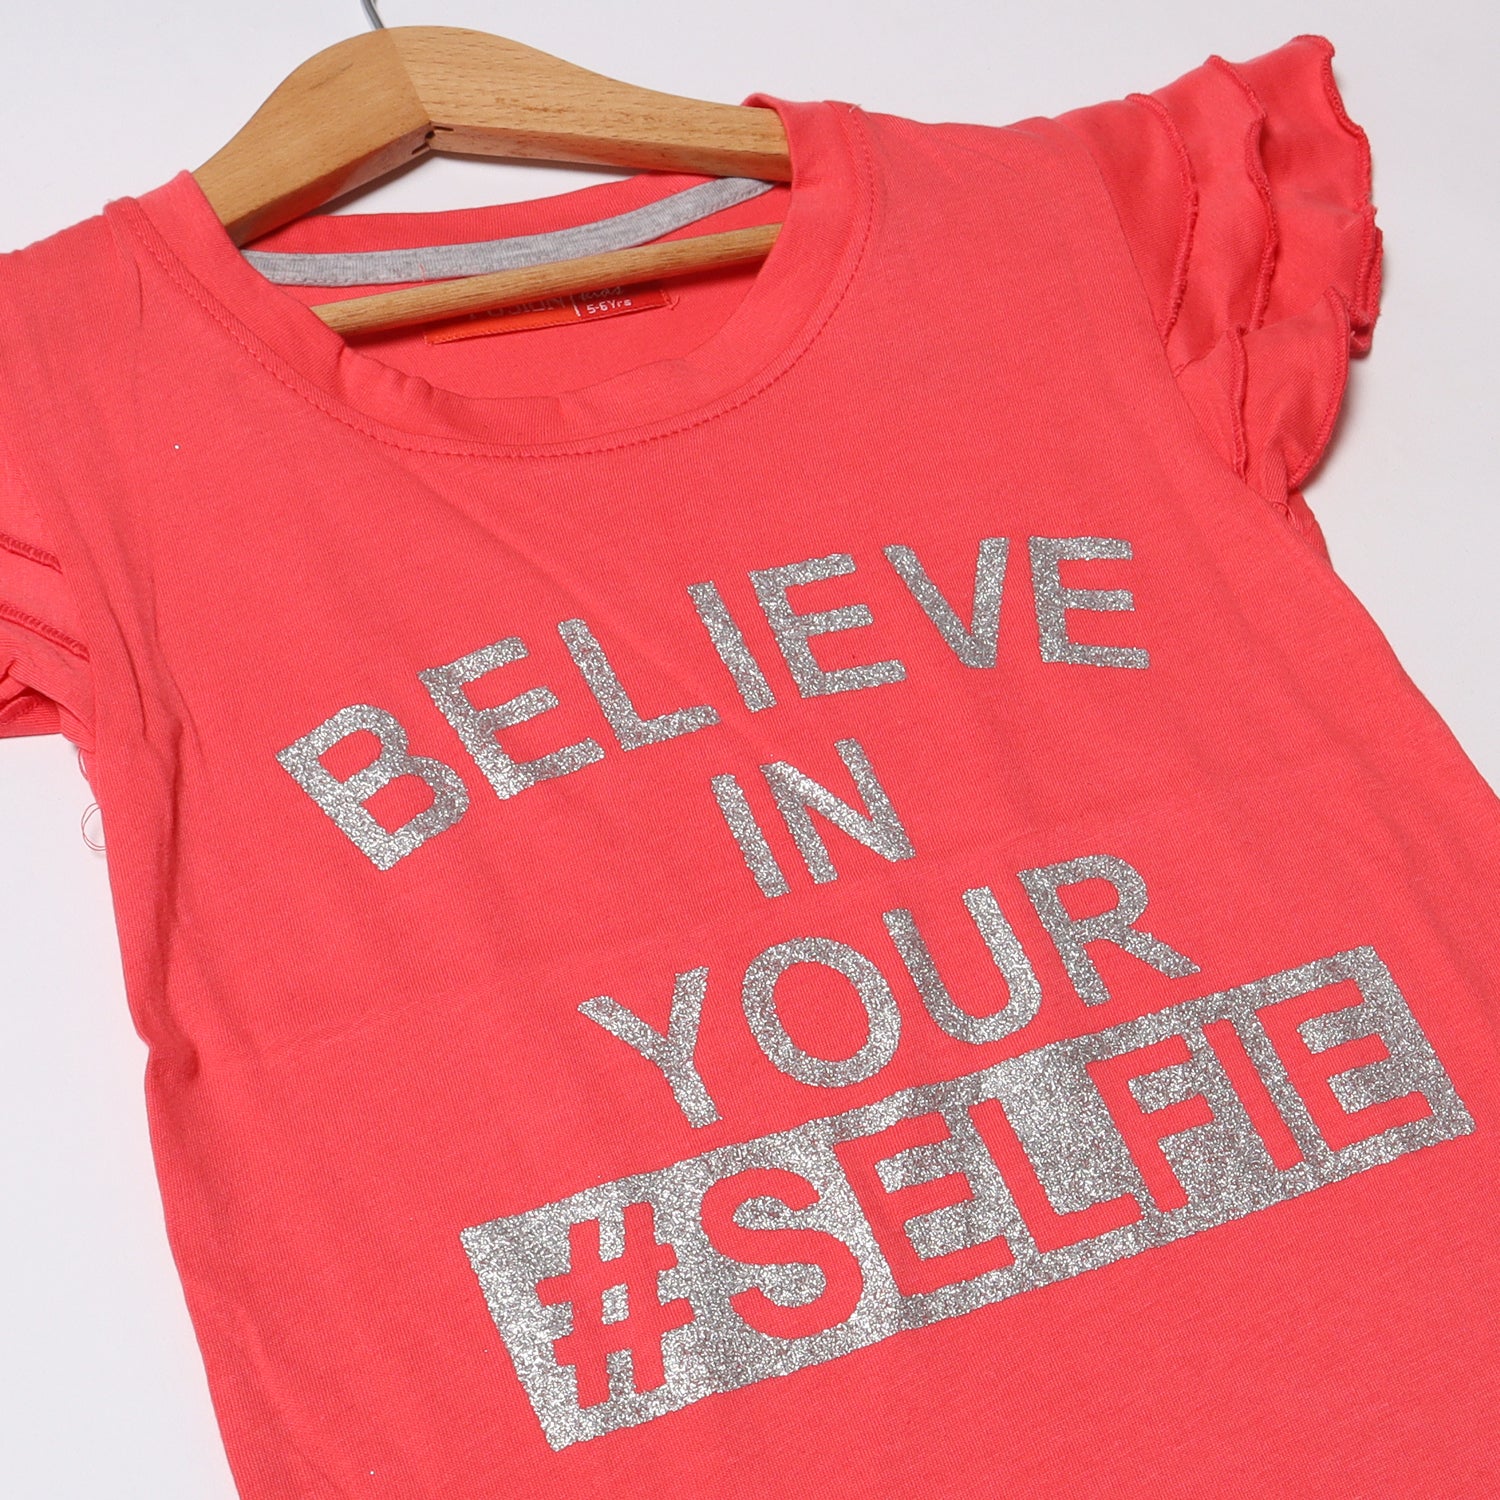 WATERMELON RED BELIEVE IN YOUR SELFIE PRINTED T-SHIRT FOR GIRLS